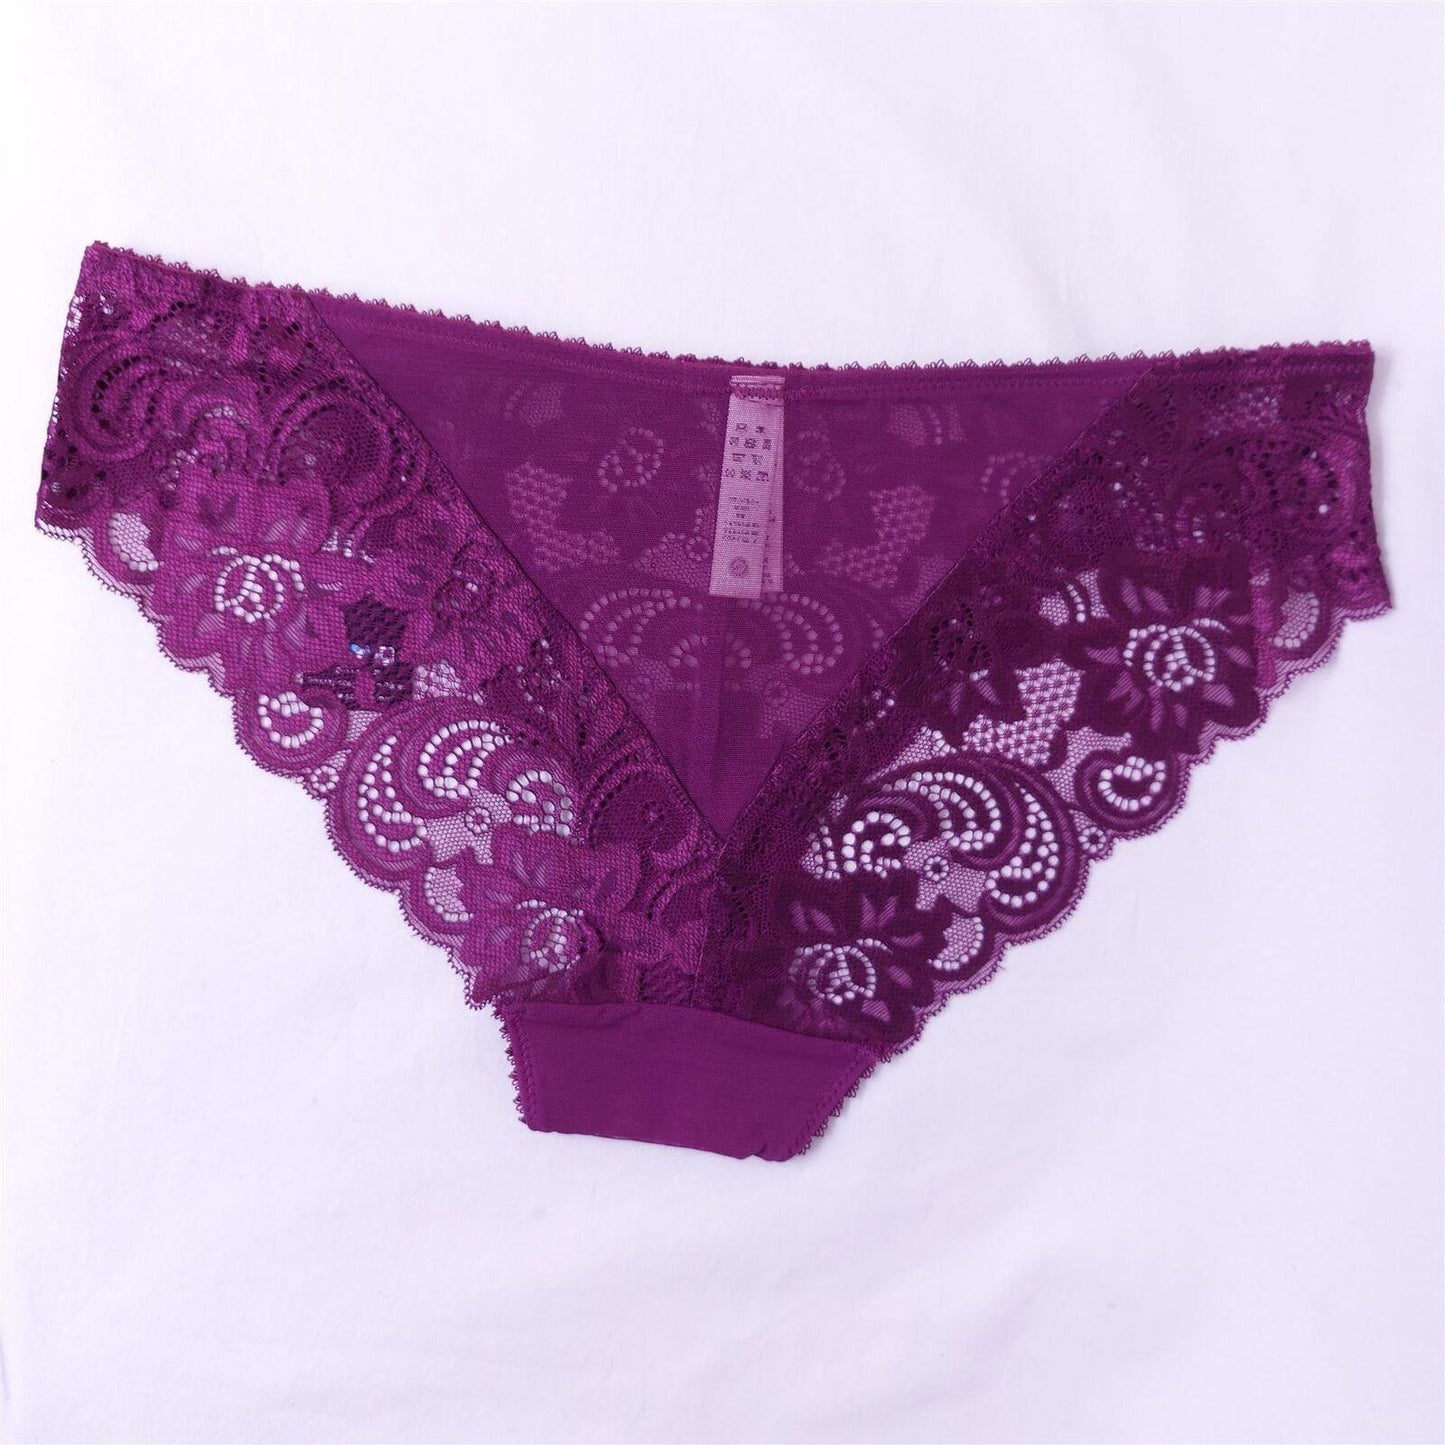 2-Pack Gossard Lace Brief Knickers Multipack Size 8-10 Purple Multipack New